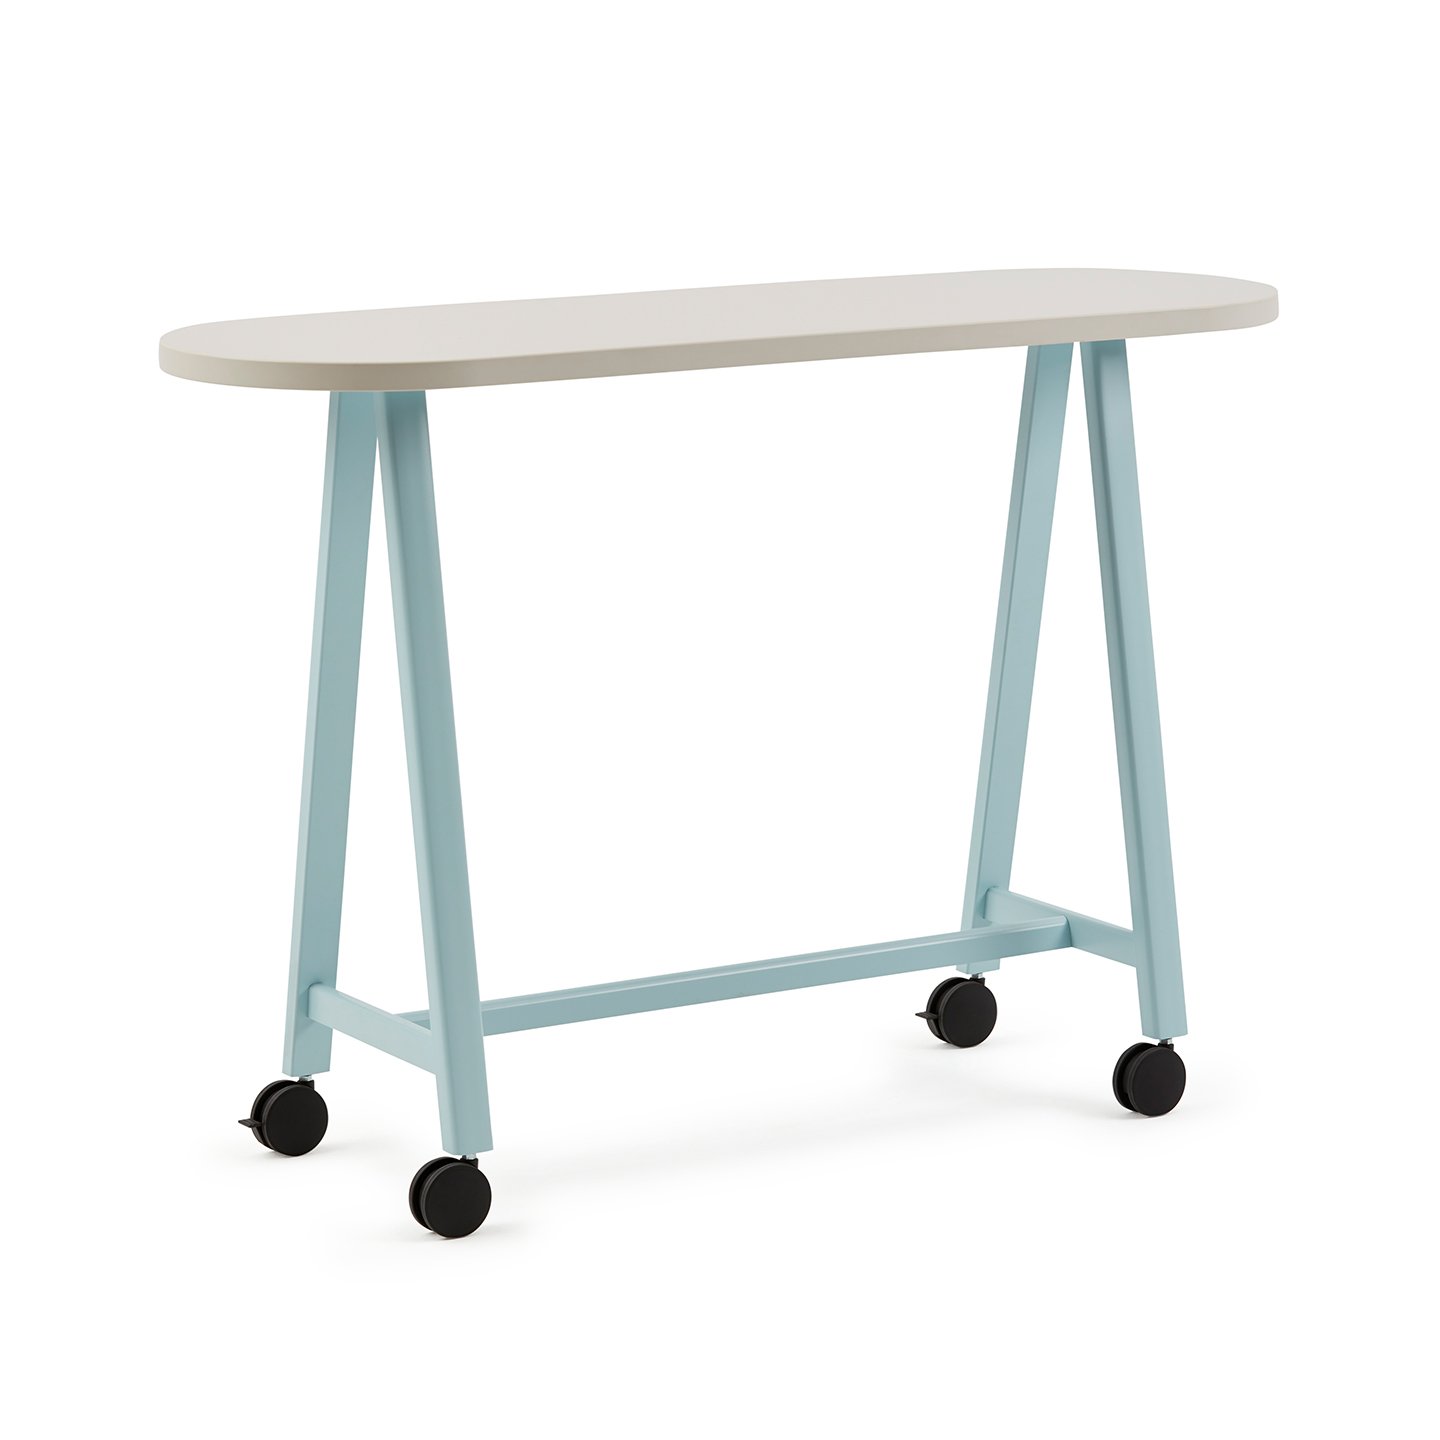 Haworth PopUp Table with chalk top and 4 legs with wheels